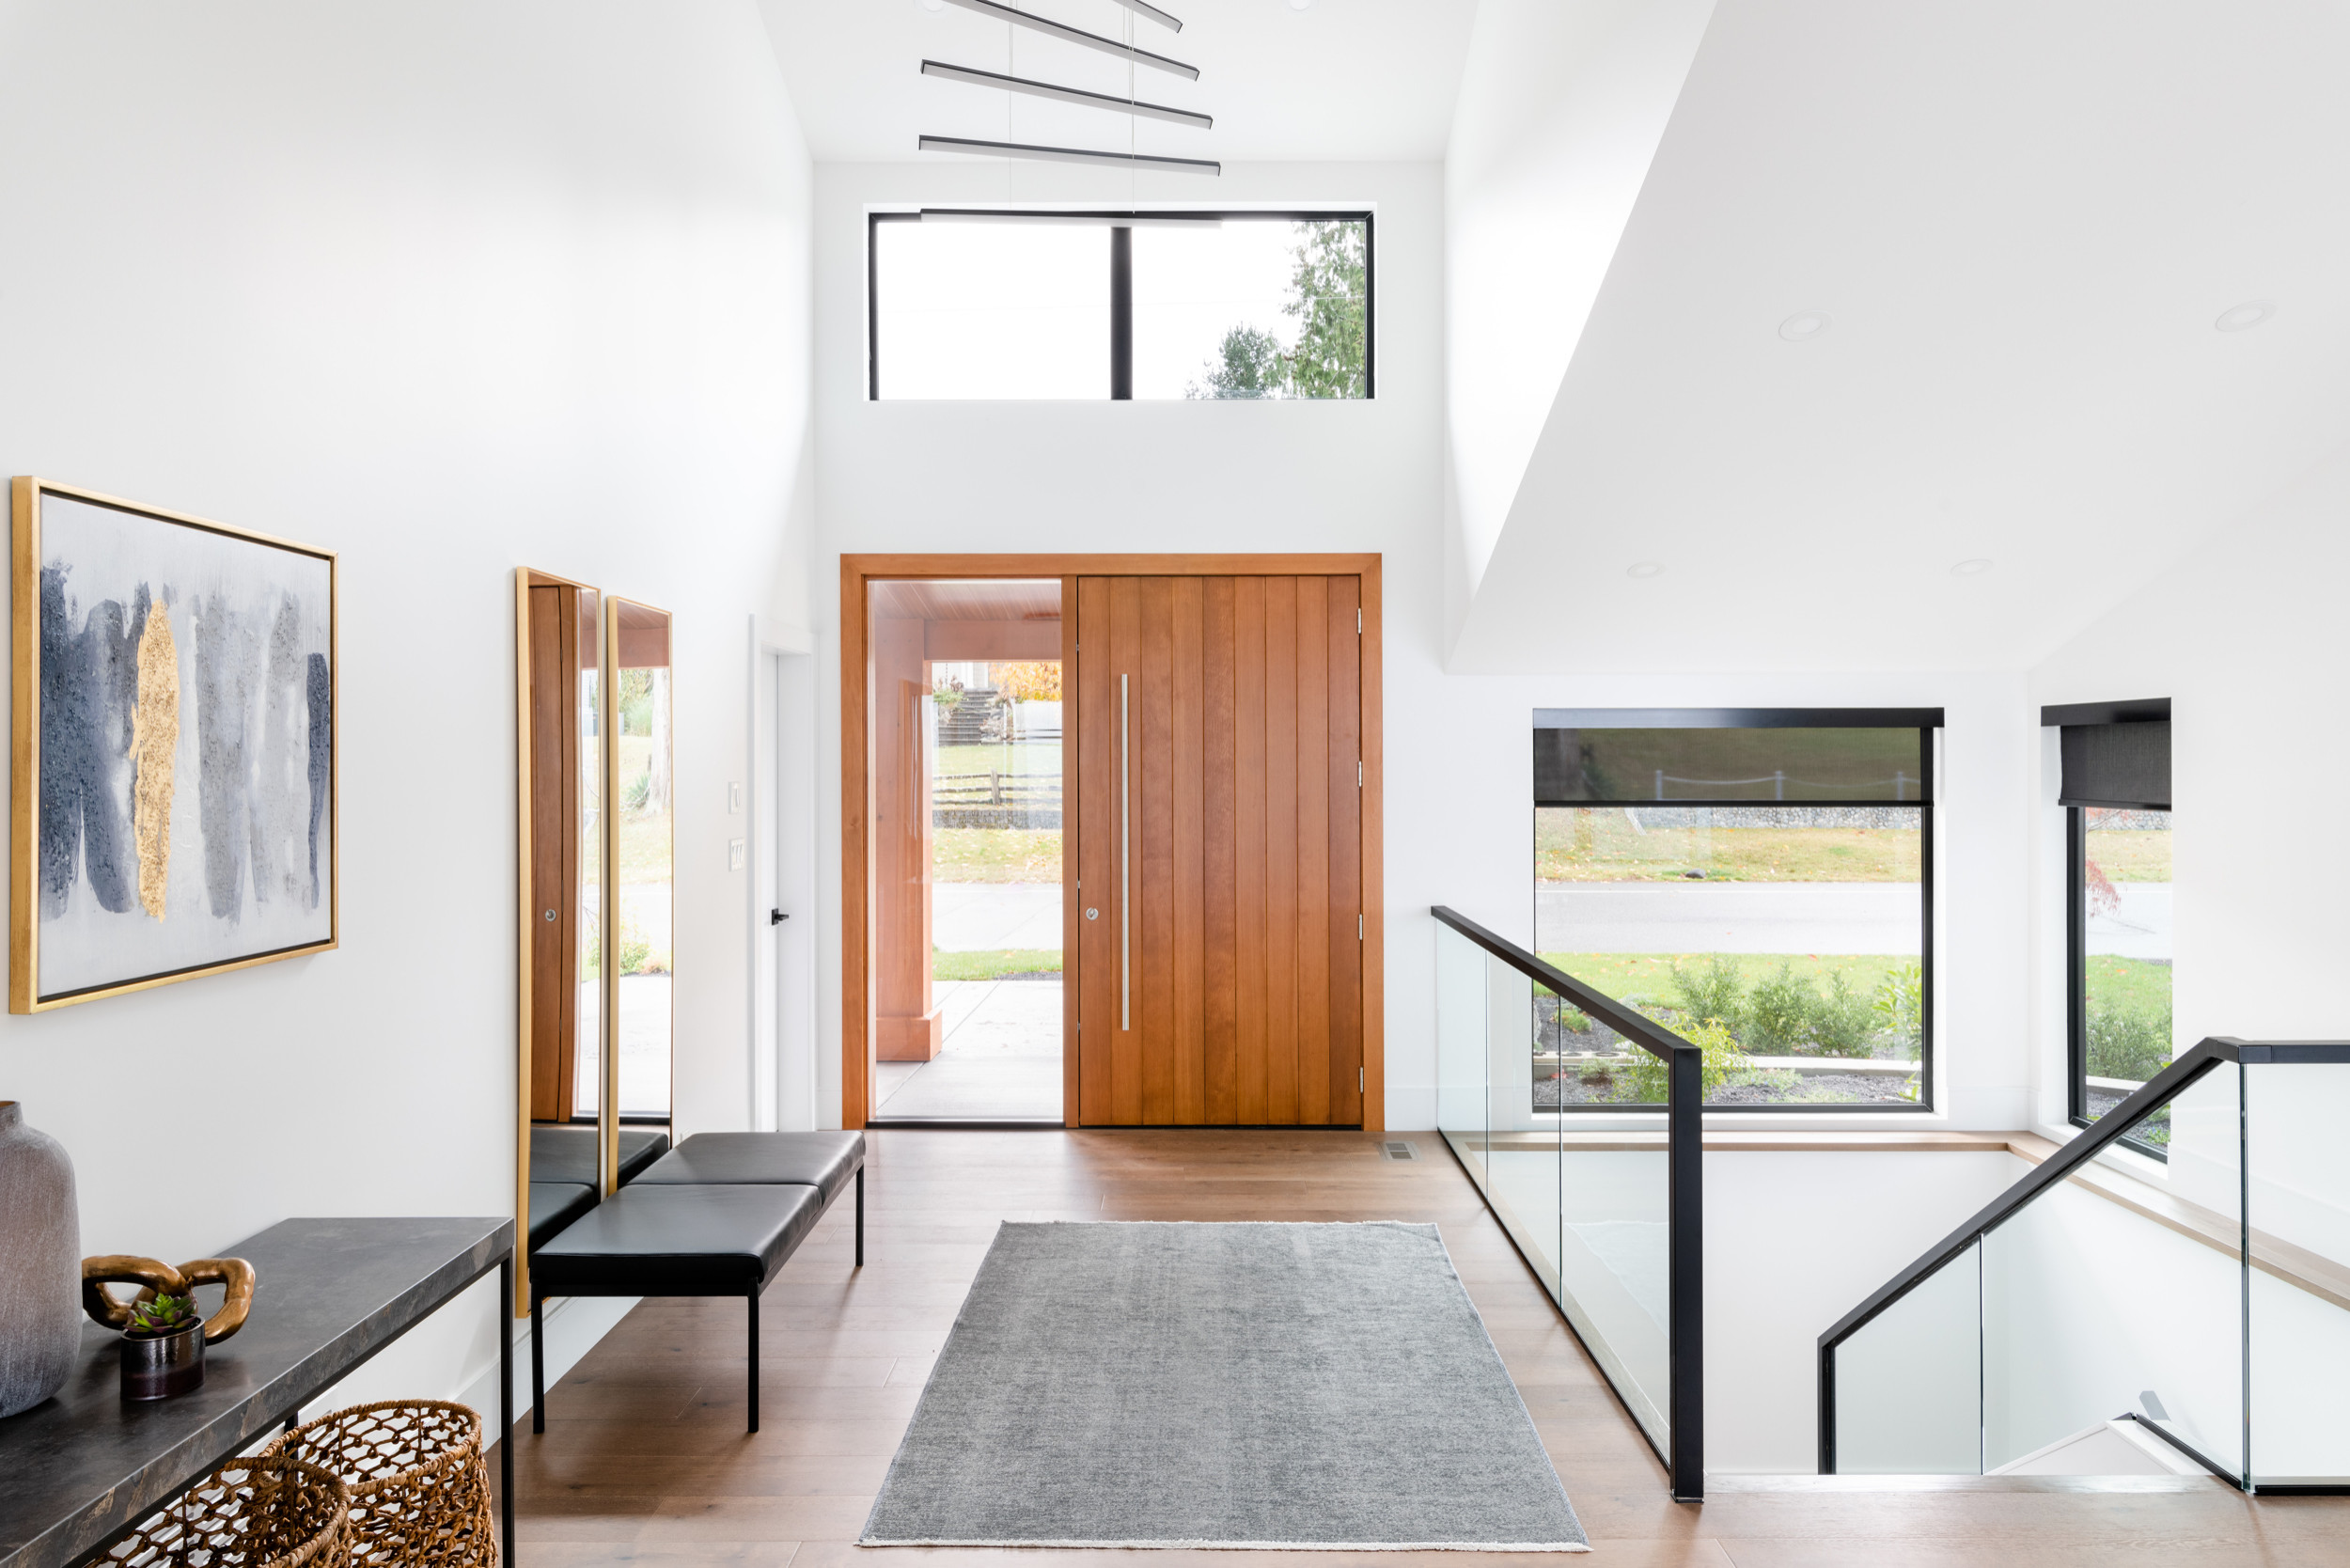 15 Beautiful Contemporary Entry Hall Designs That Will Greet You Every Time